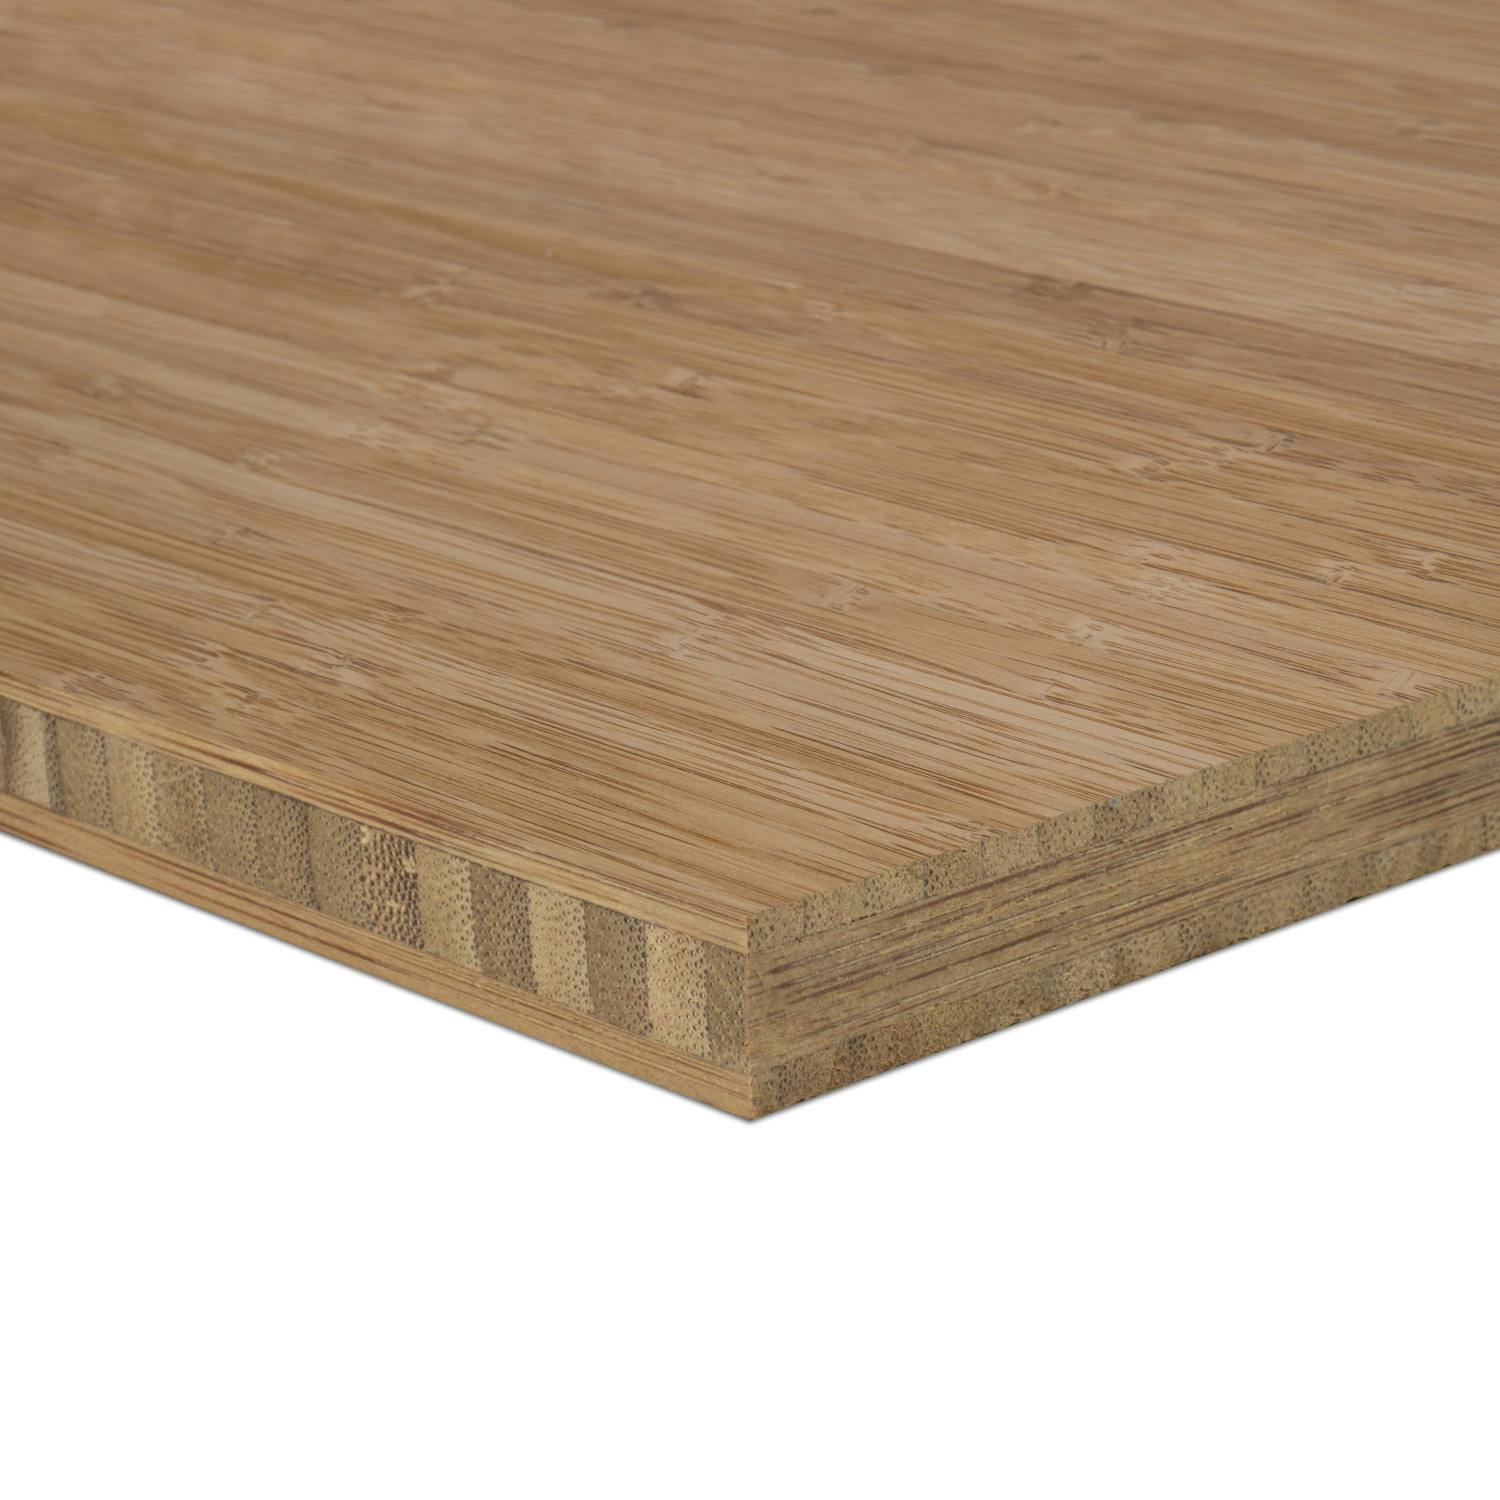 1/2 Inch Carbonized Vertical Bamboo Plywood - 3 PLY